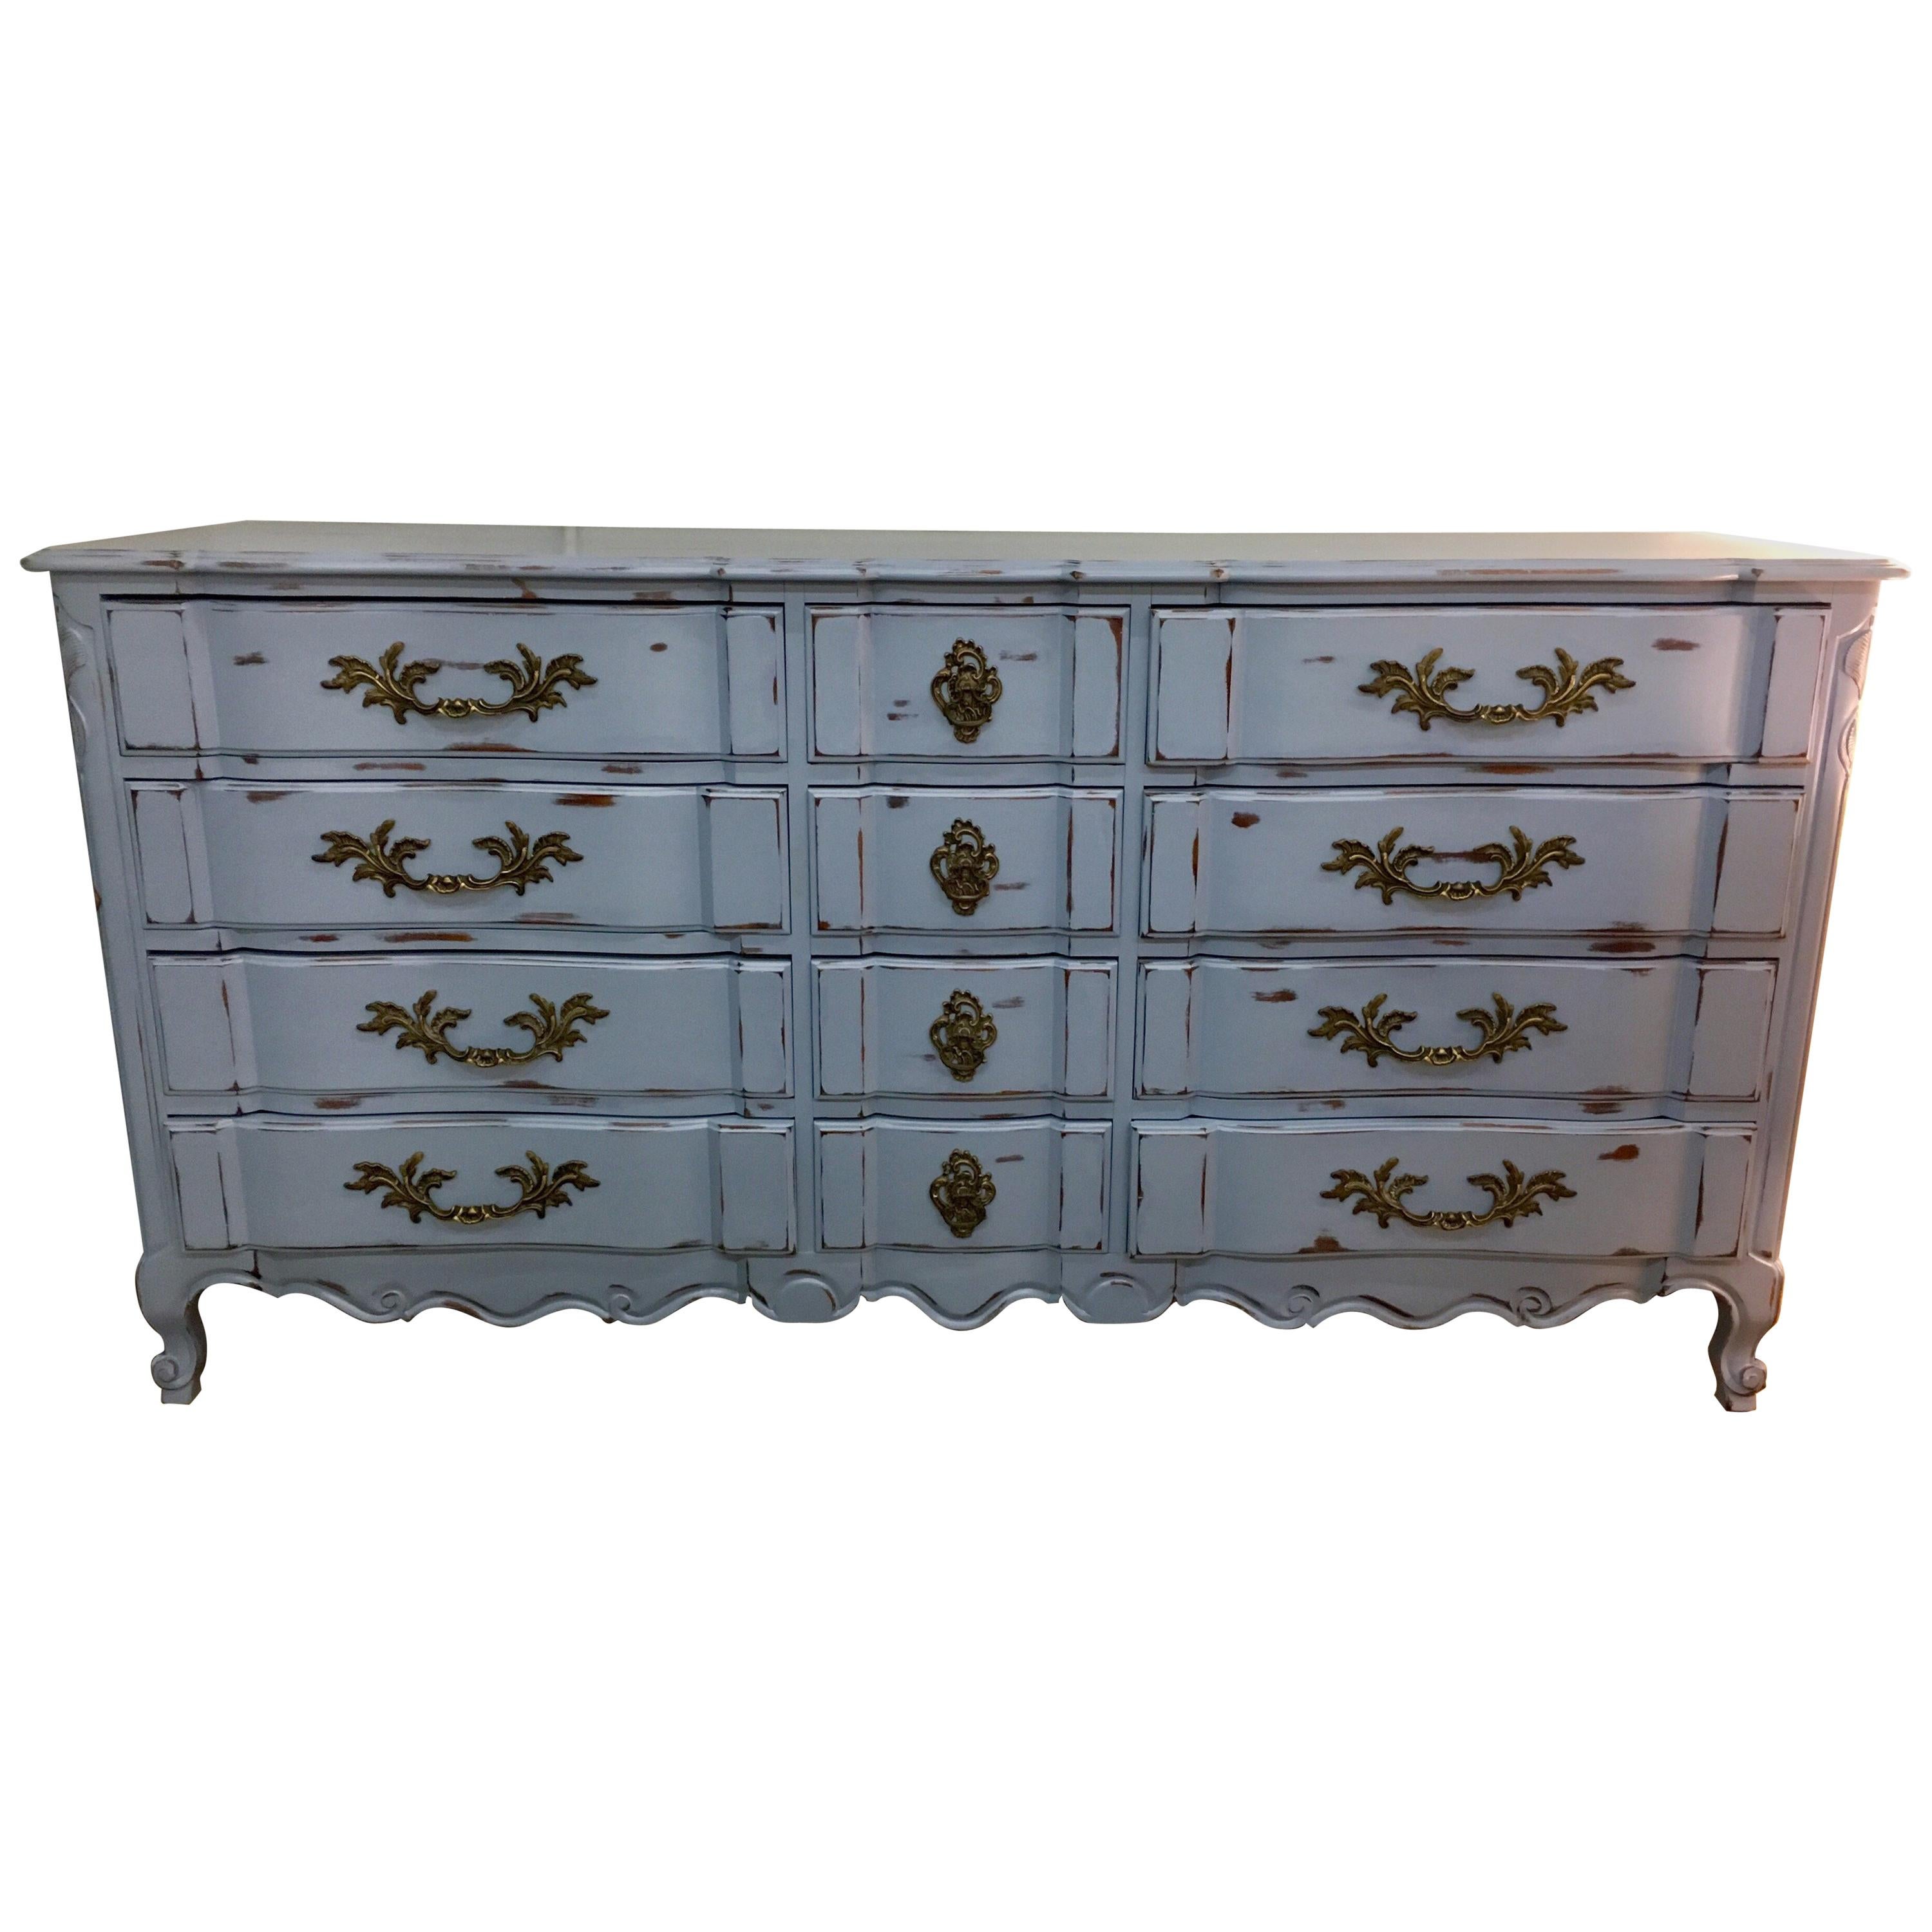 French Provincial Twelve-Drawer Chest of Drawers Dresser Fully Refurbished Blue